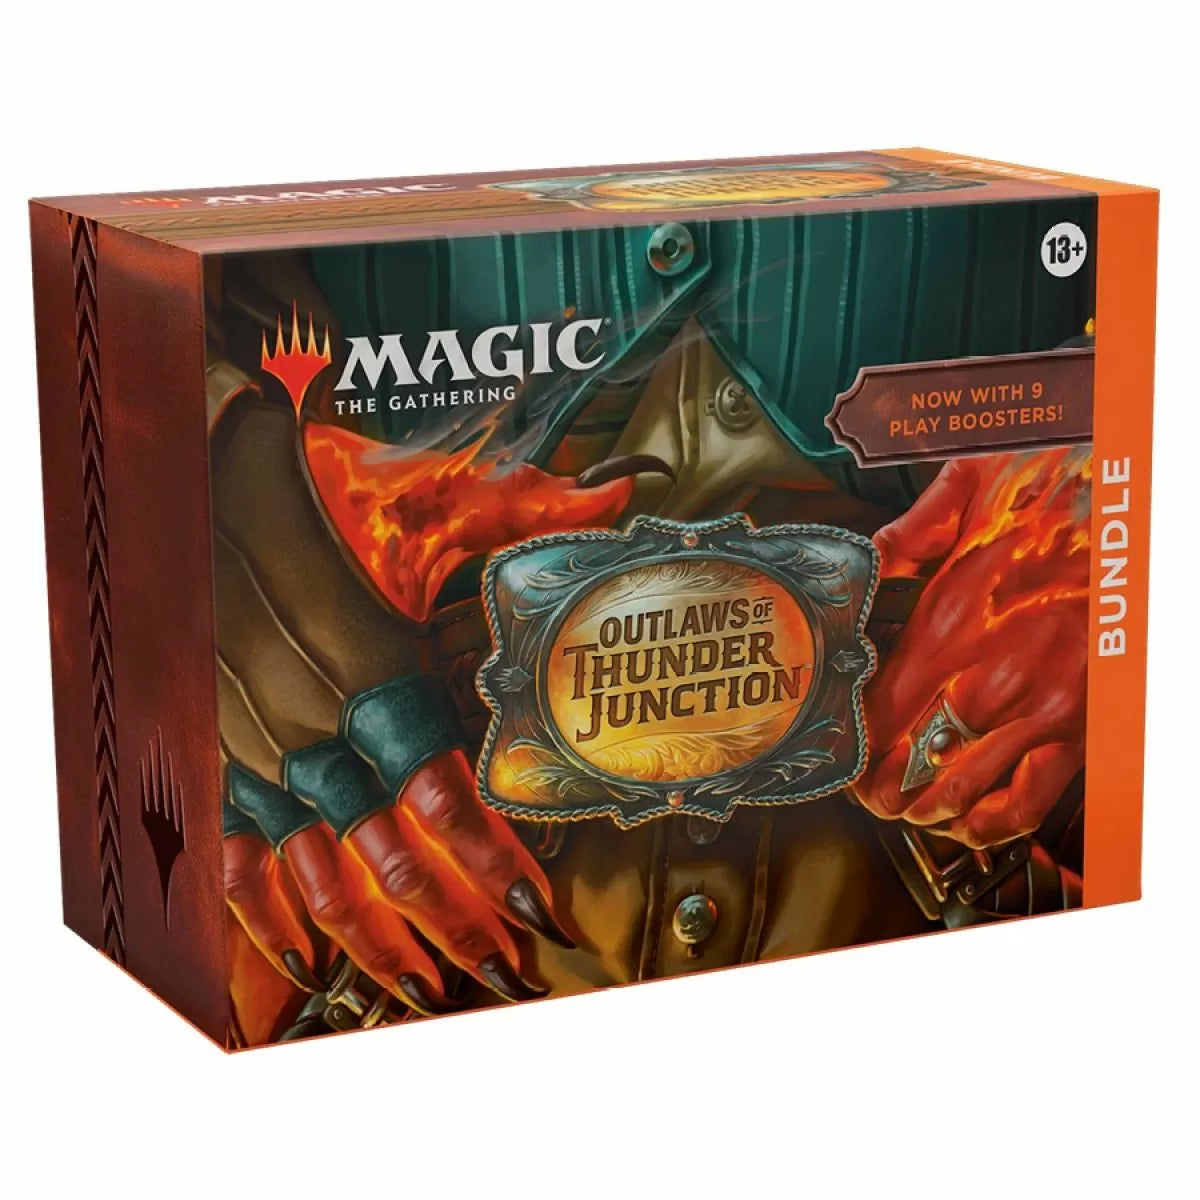 Magic: The Gathering - Outlaws of Thunder Junction Bundle *Sealed* (PRE-ORDER, SHIPS APR 19TH)